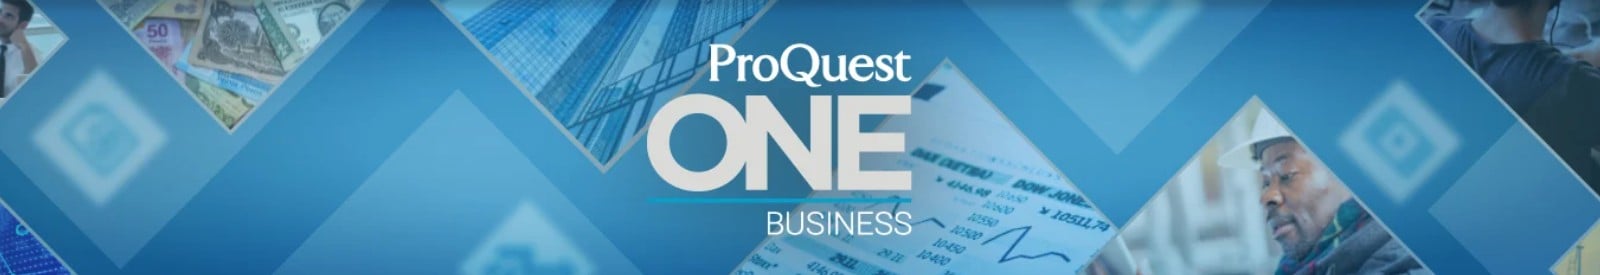 ProQuest One Business is “Sleek and Intuitive,” says Charleston Advisor